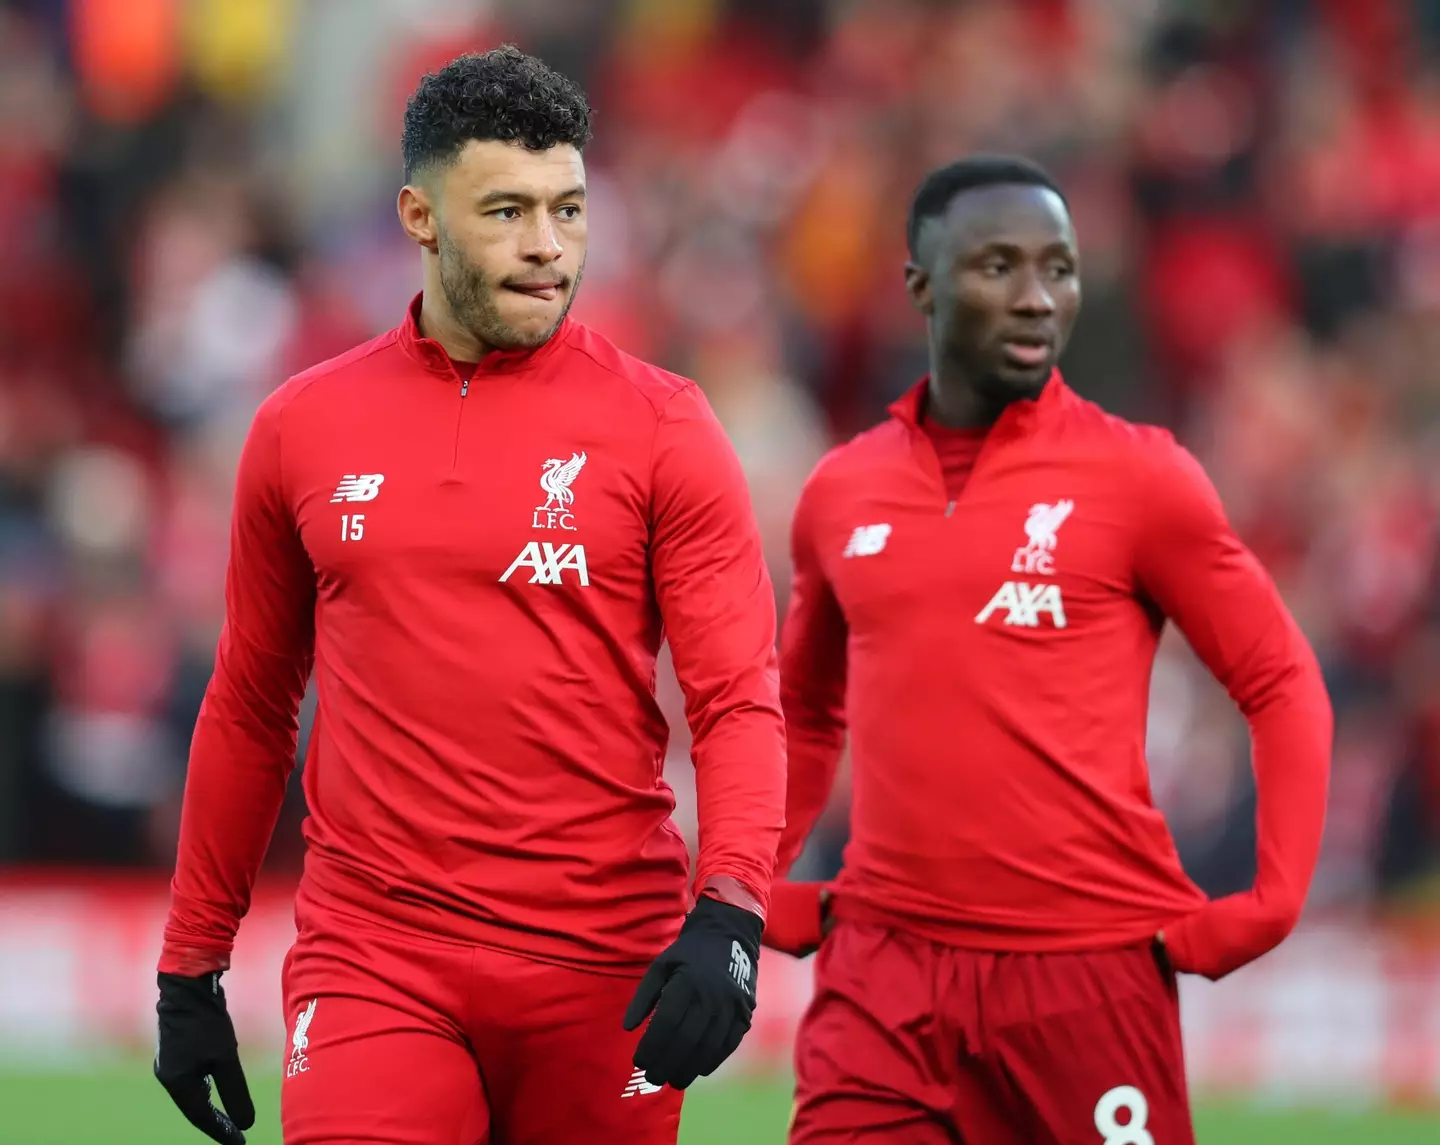 Oxlade-Chamberlain and Keita are in danger of missing out. (Image